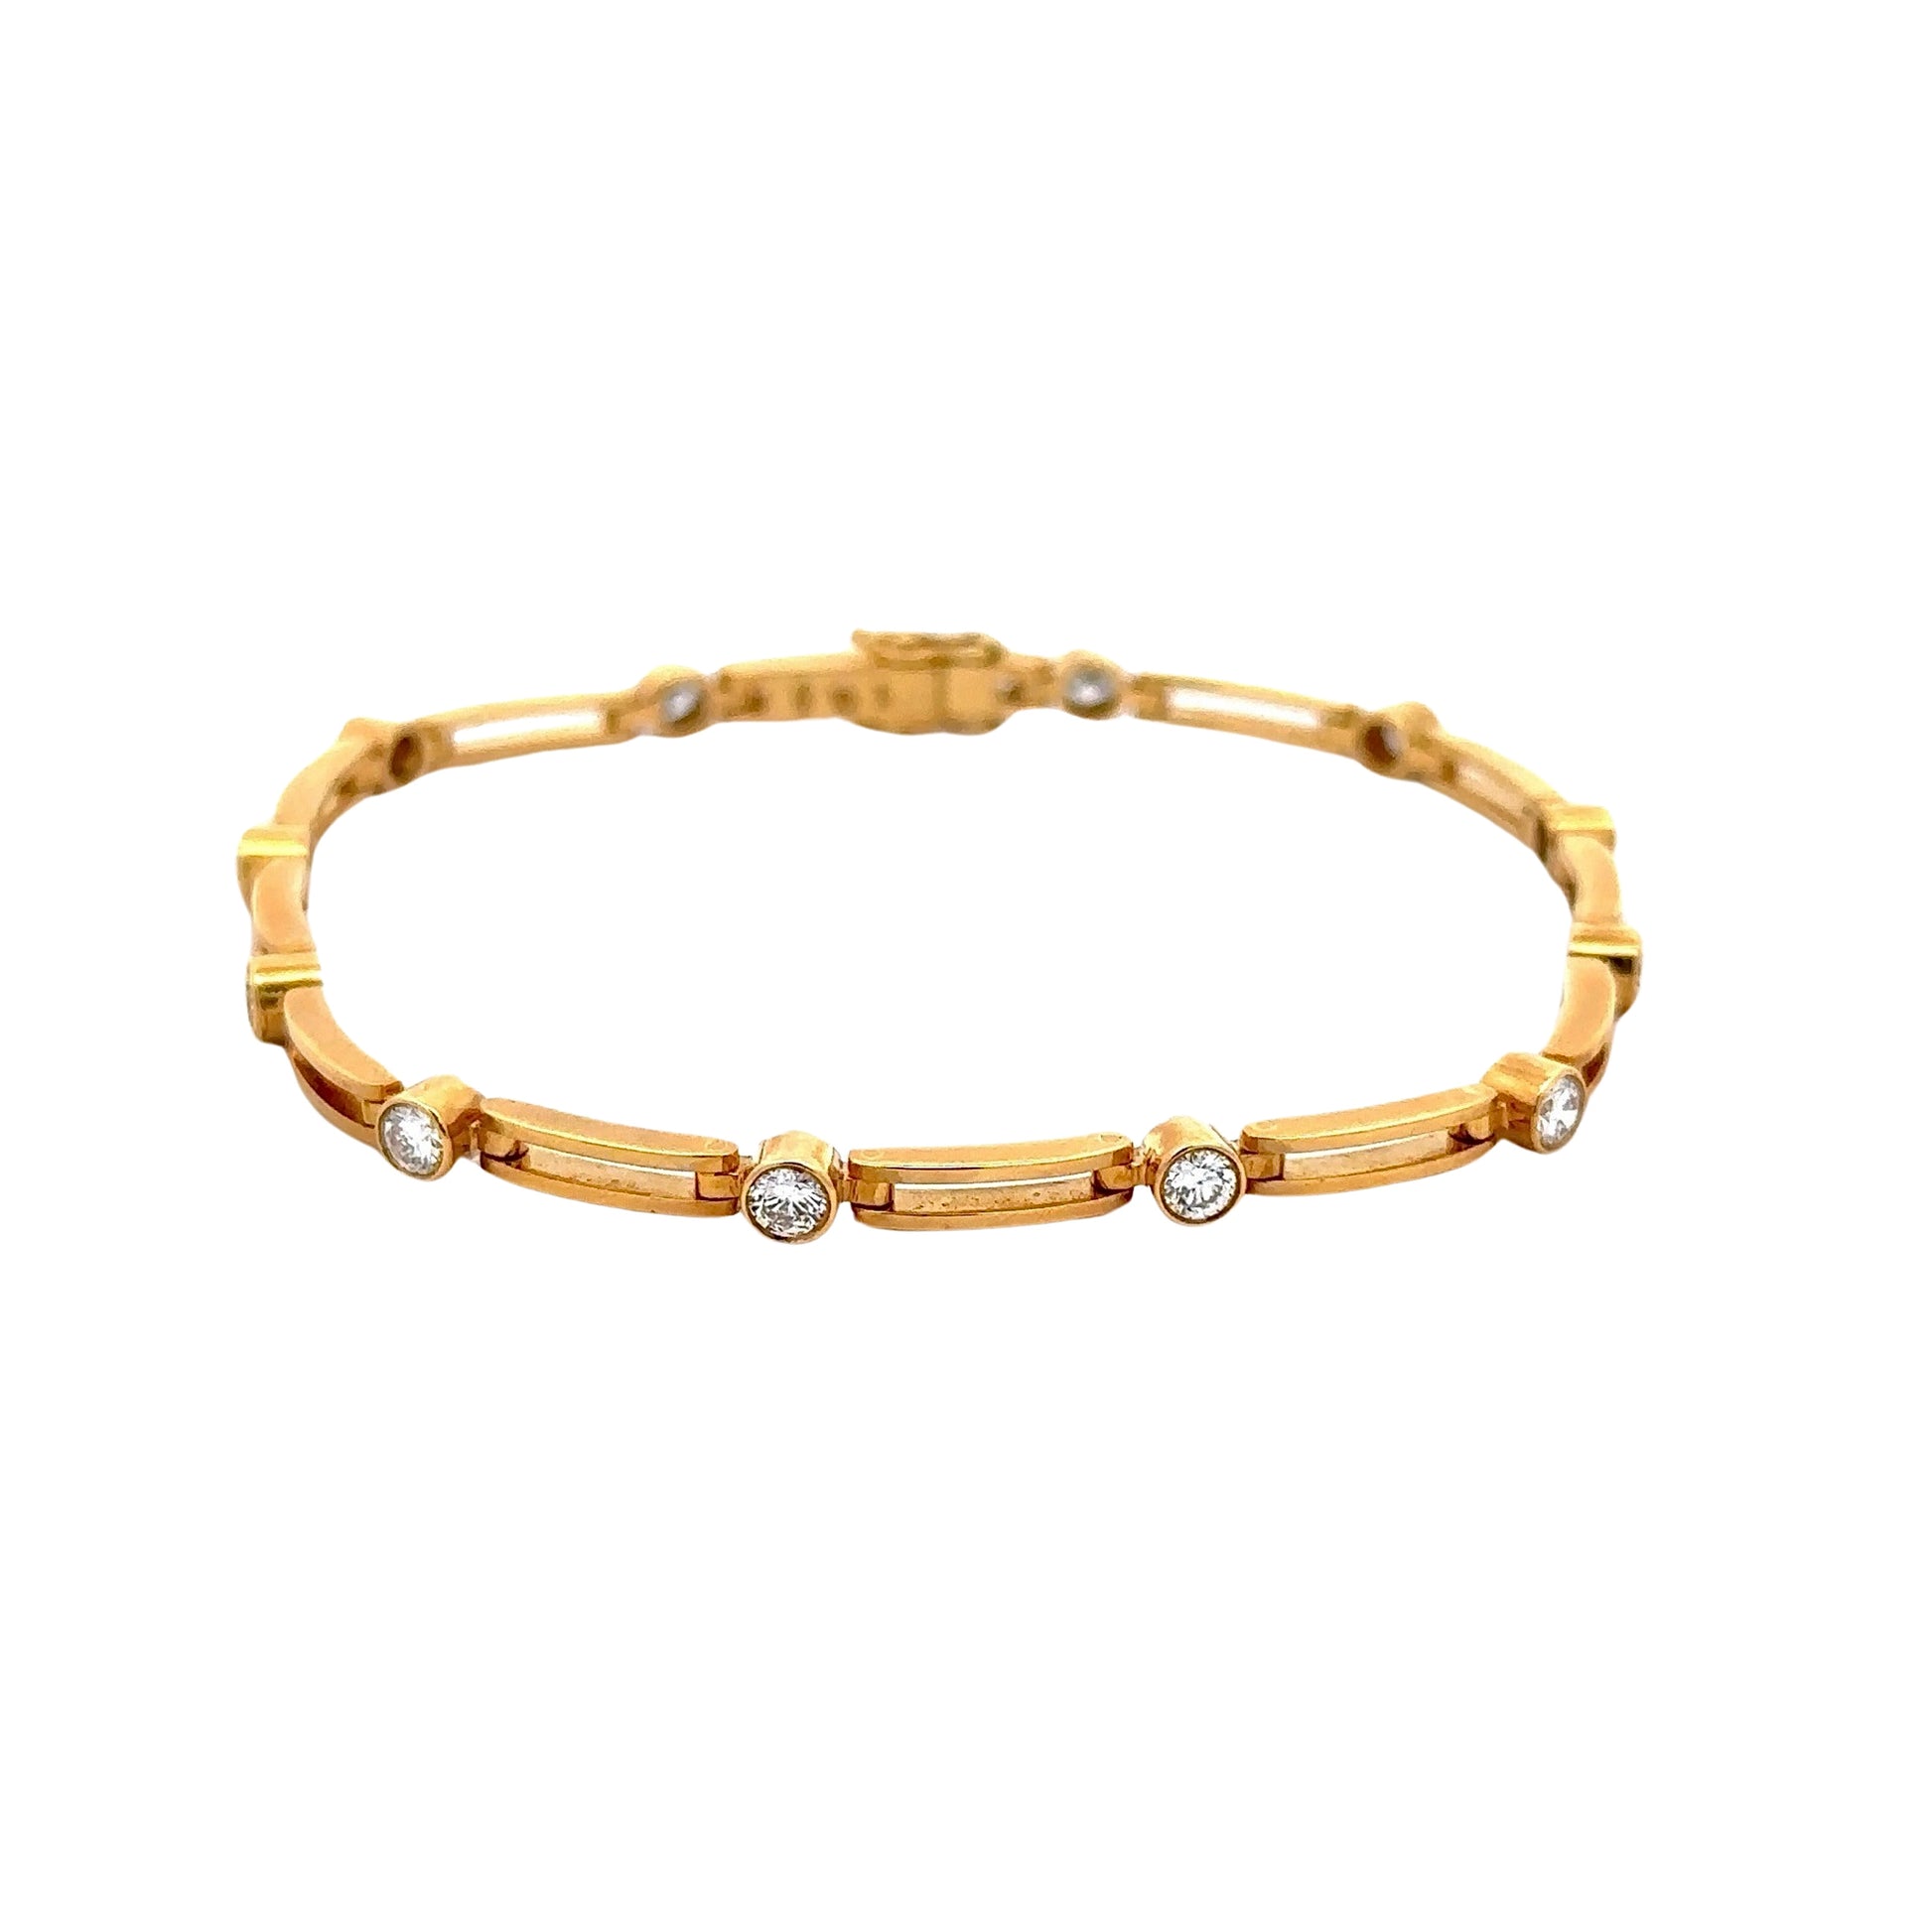 Front of 18K yellow gold diamond bracelet with 1 single diamond between each link